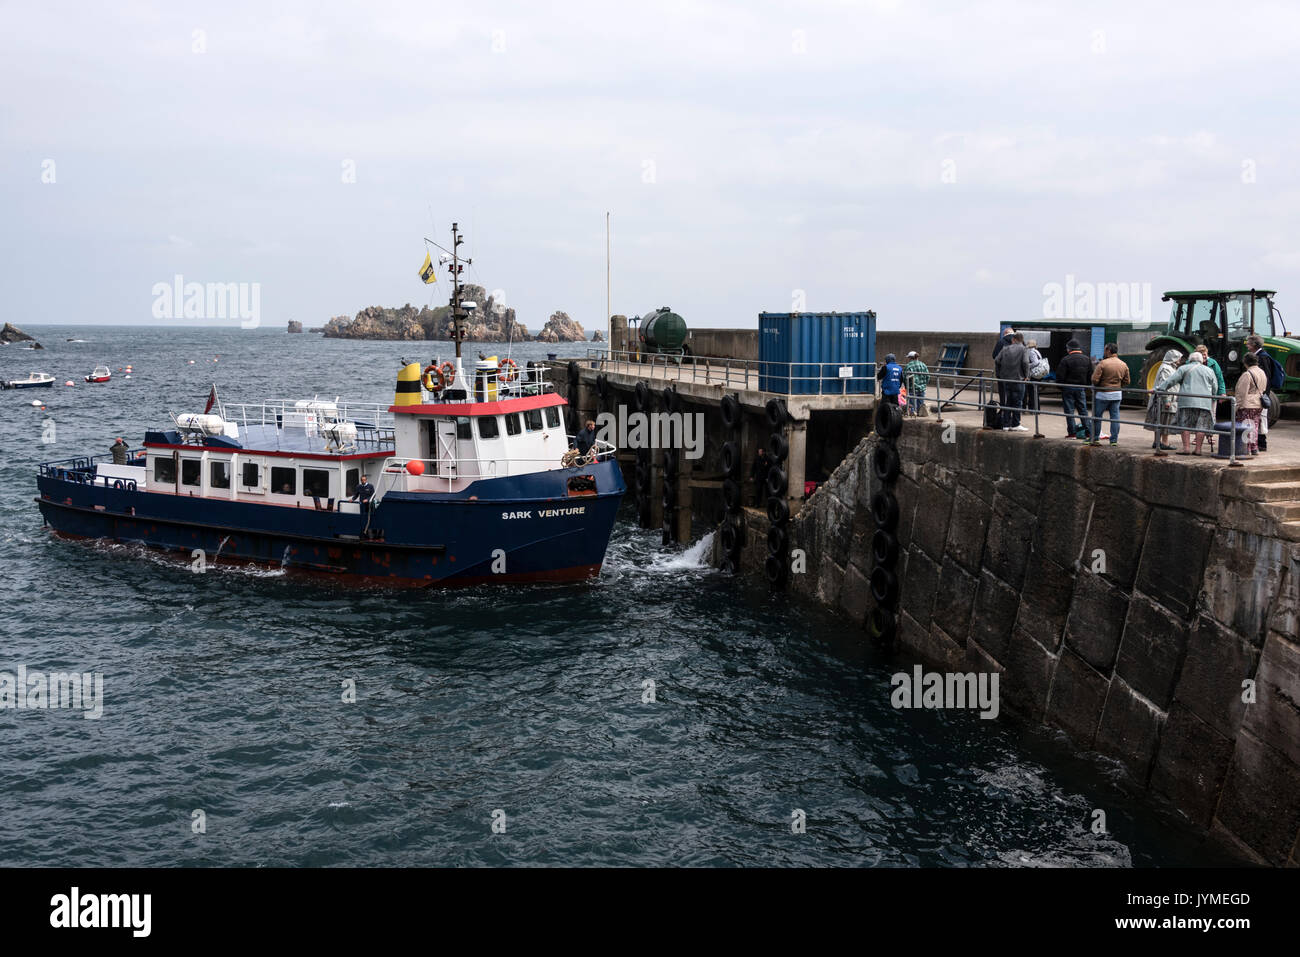 A passenger ferry from Guernsey docks at Sark harbour on the Isle of Sark, Bailiwick of Guernsey in the Channel Islands, Britain Stock Photo